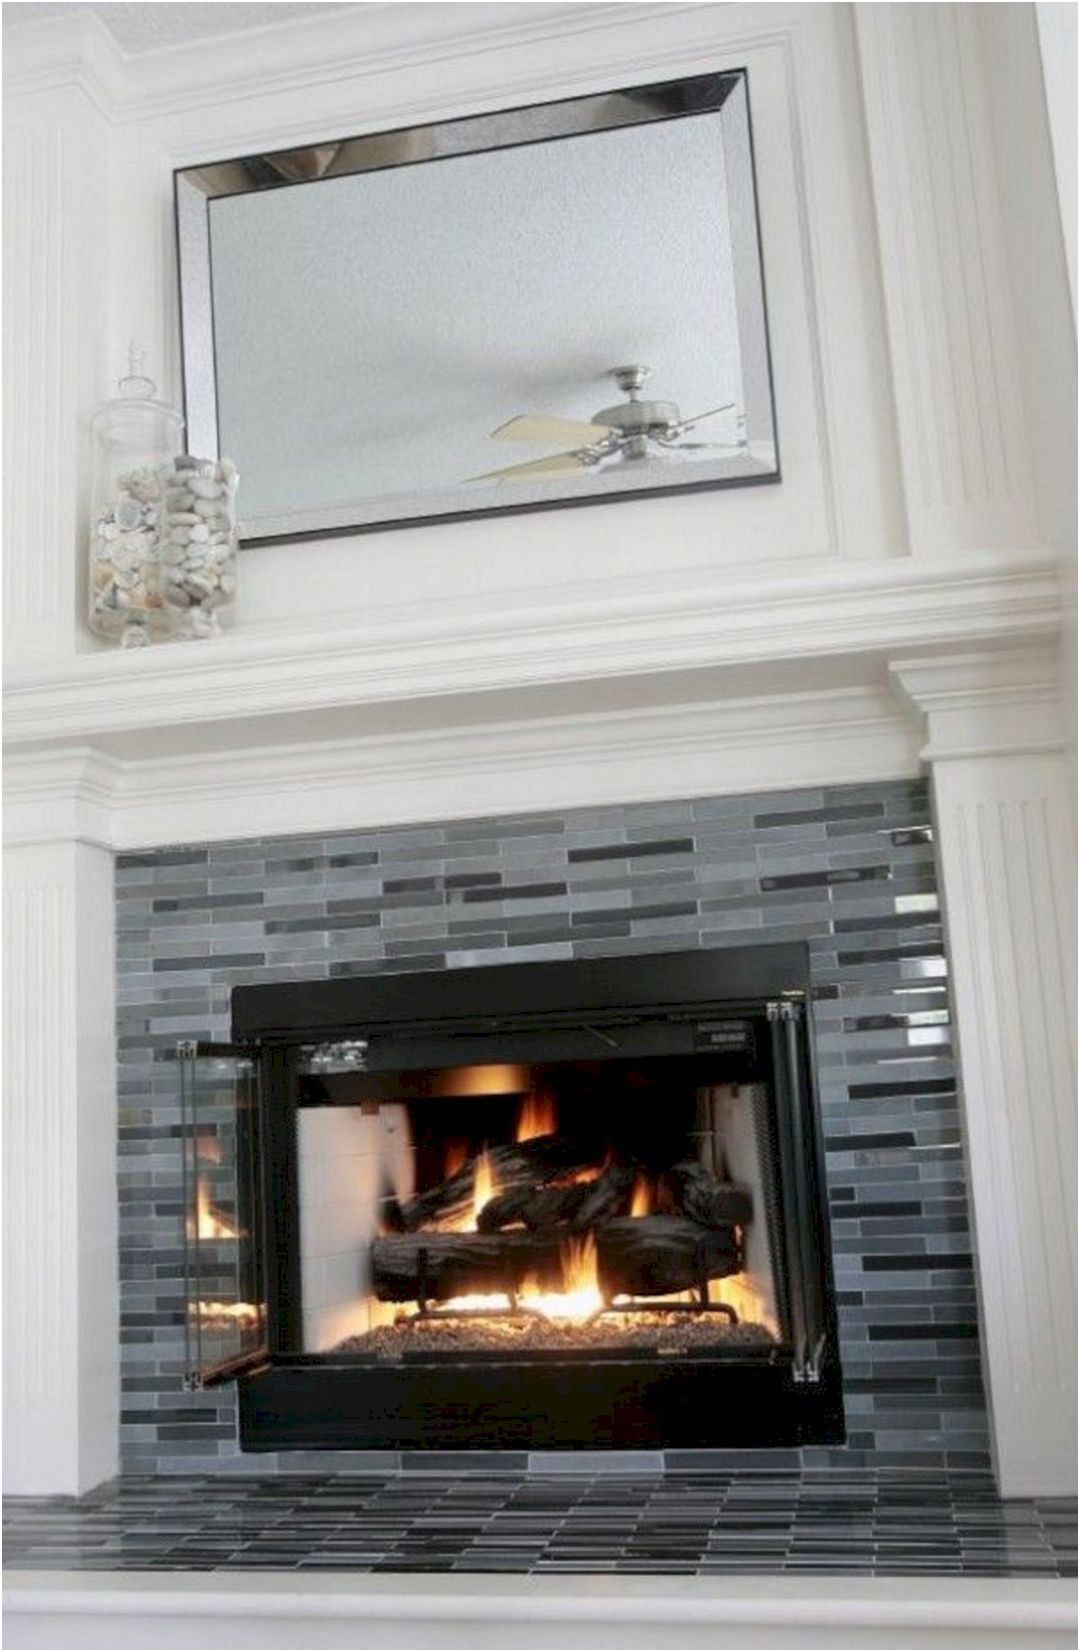 Luxury Tile Ideas for Around Fireplace